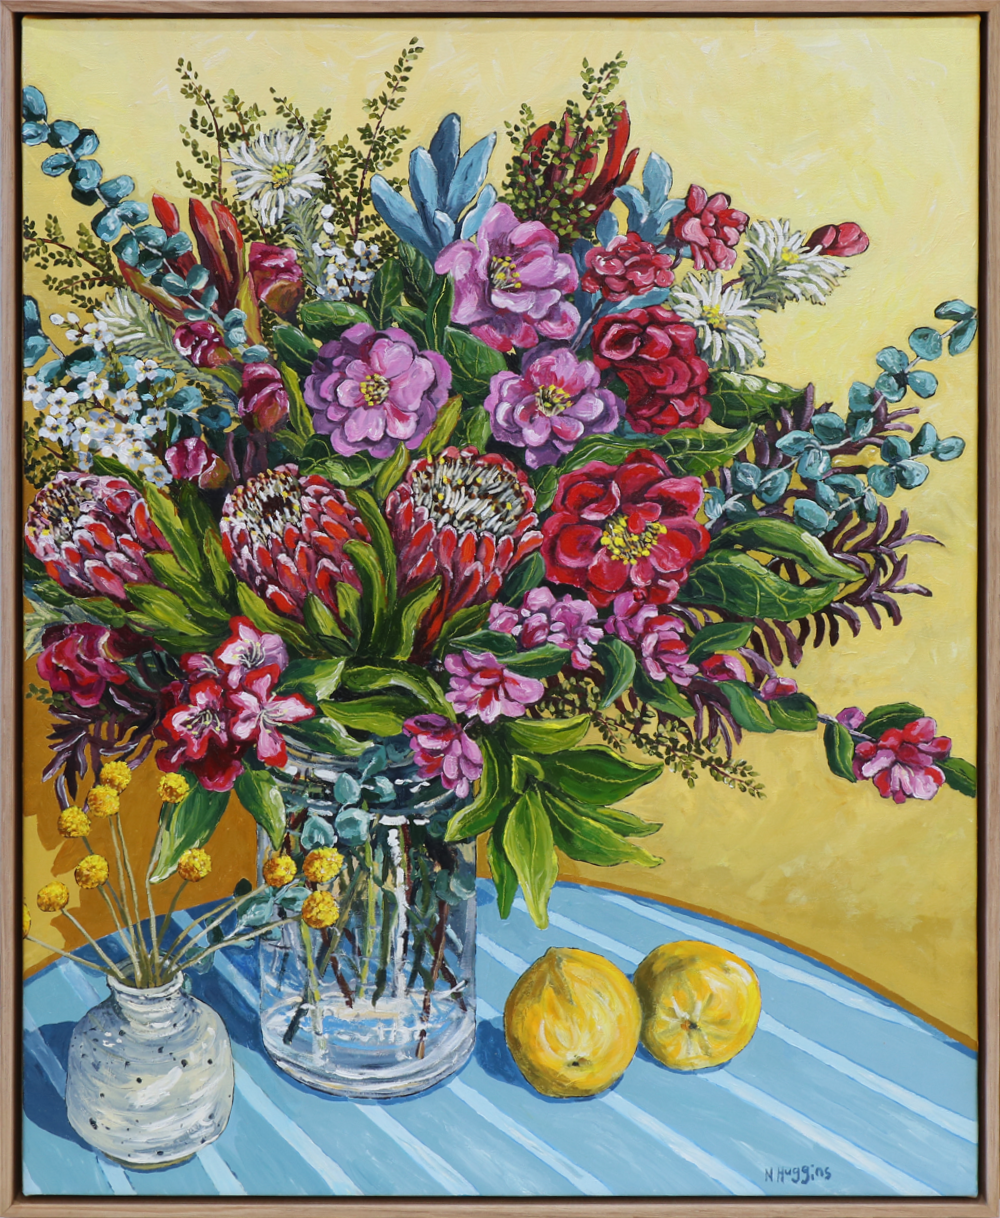 Camellia's and Proteas on lemon Narelle Huggins The Happiness project